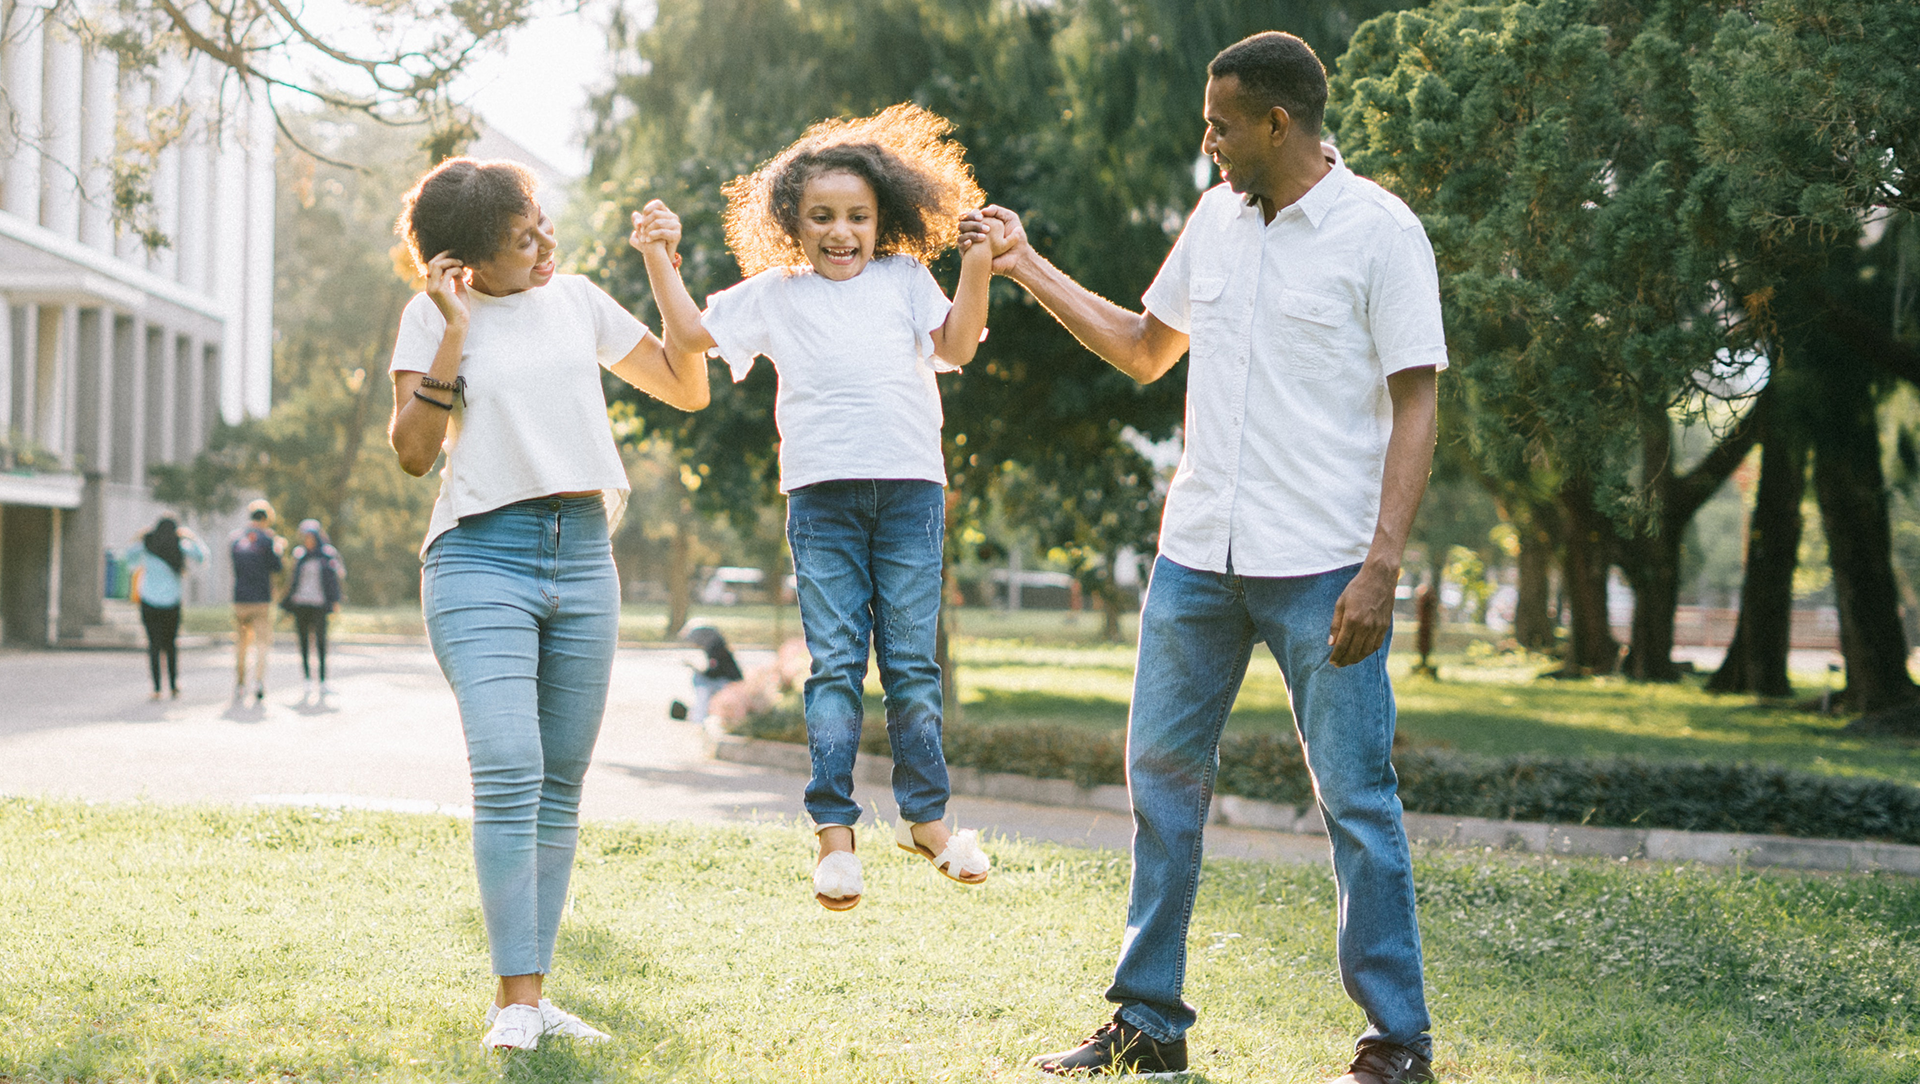 Fostering Stoke-on-Trent homepage background image showing a family playing happily